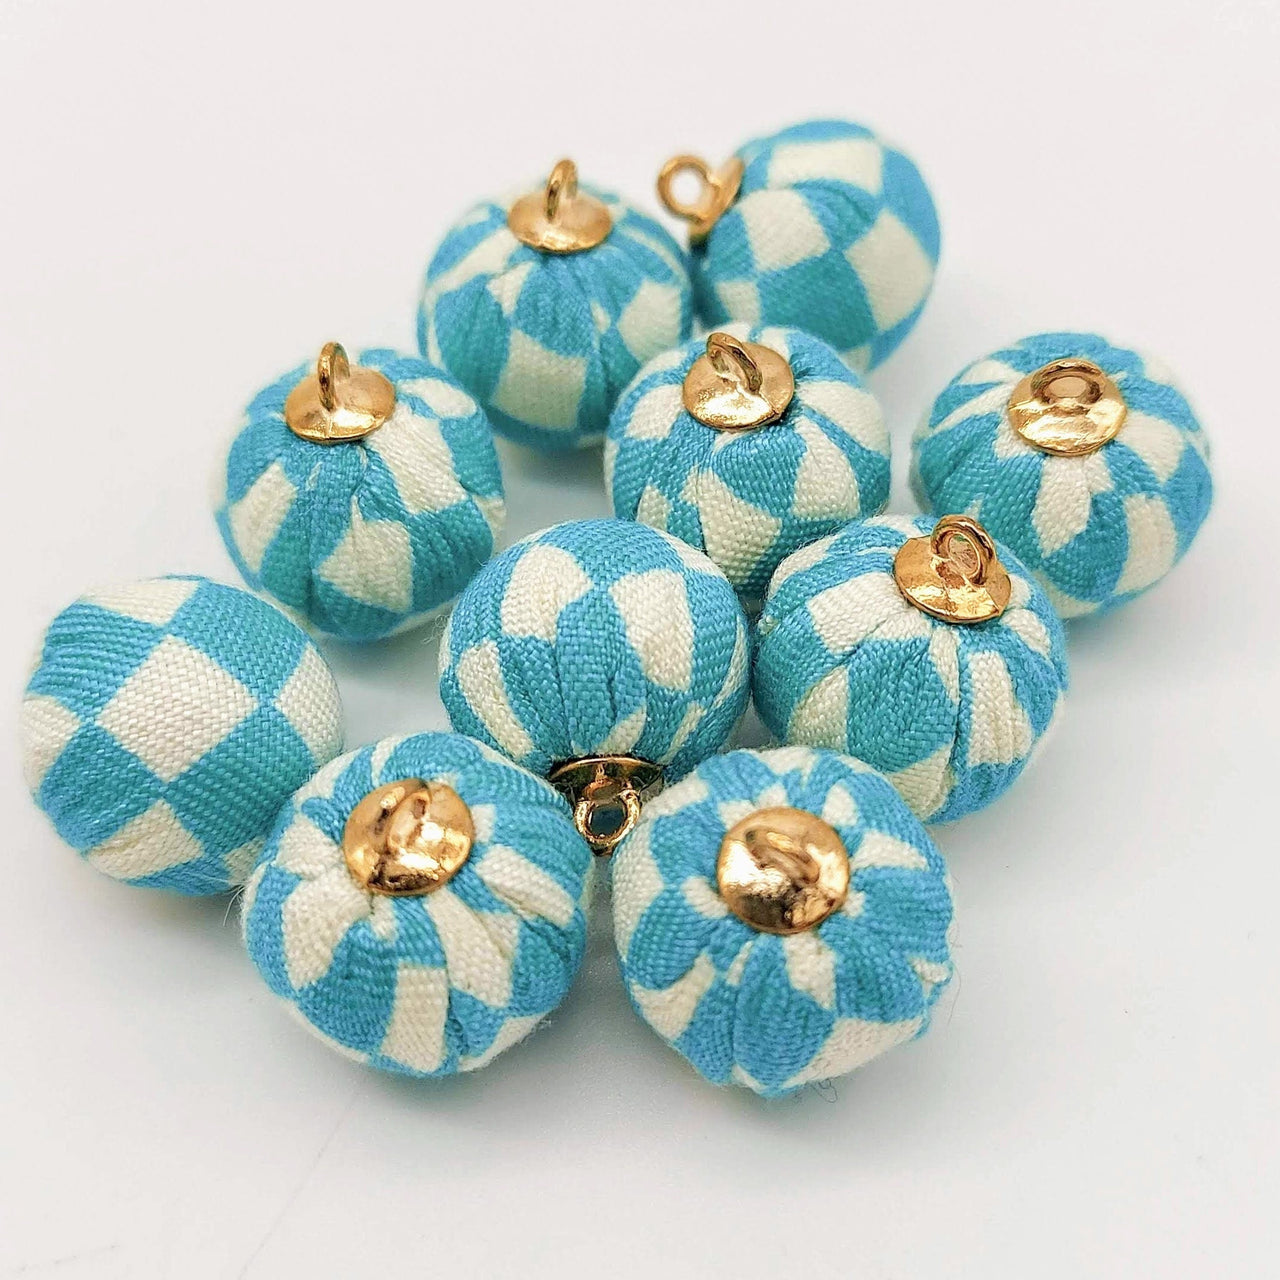 Blue and White Checkered Cotton Fabric Balls Tassel, Button with Ring Cap, Decorative Tassels